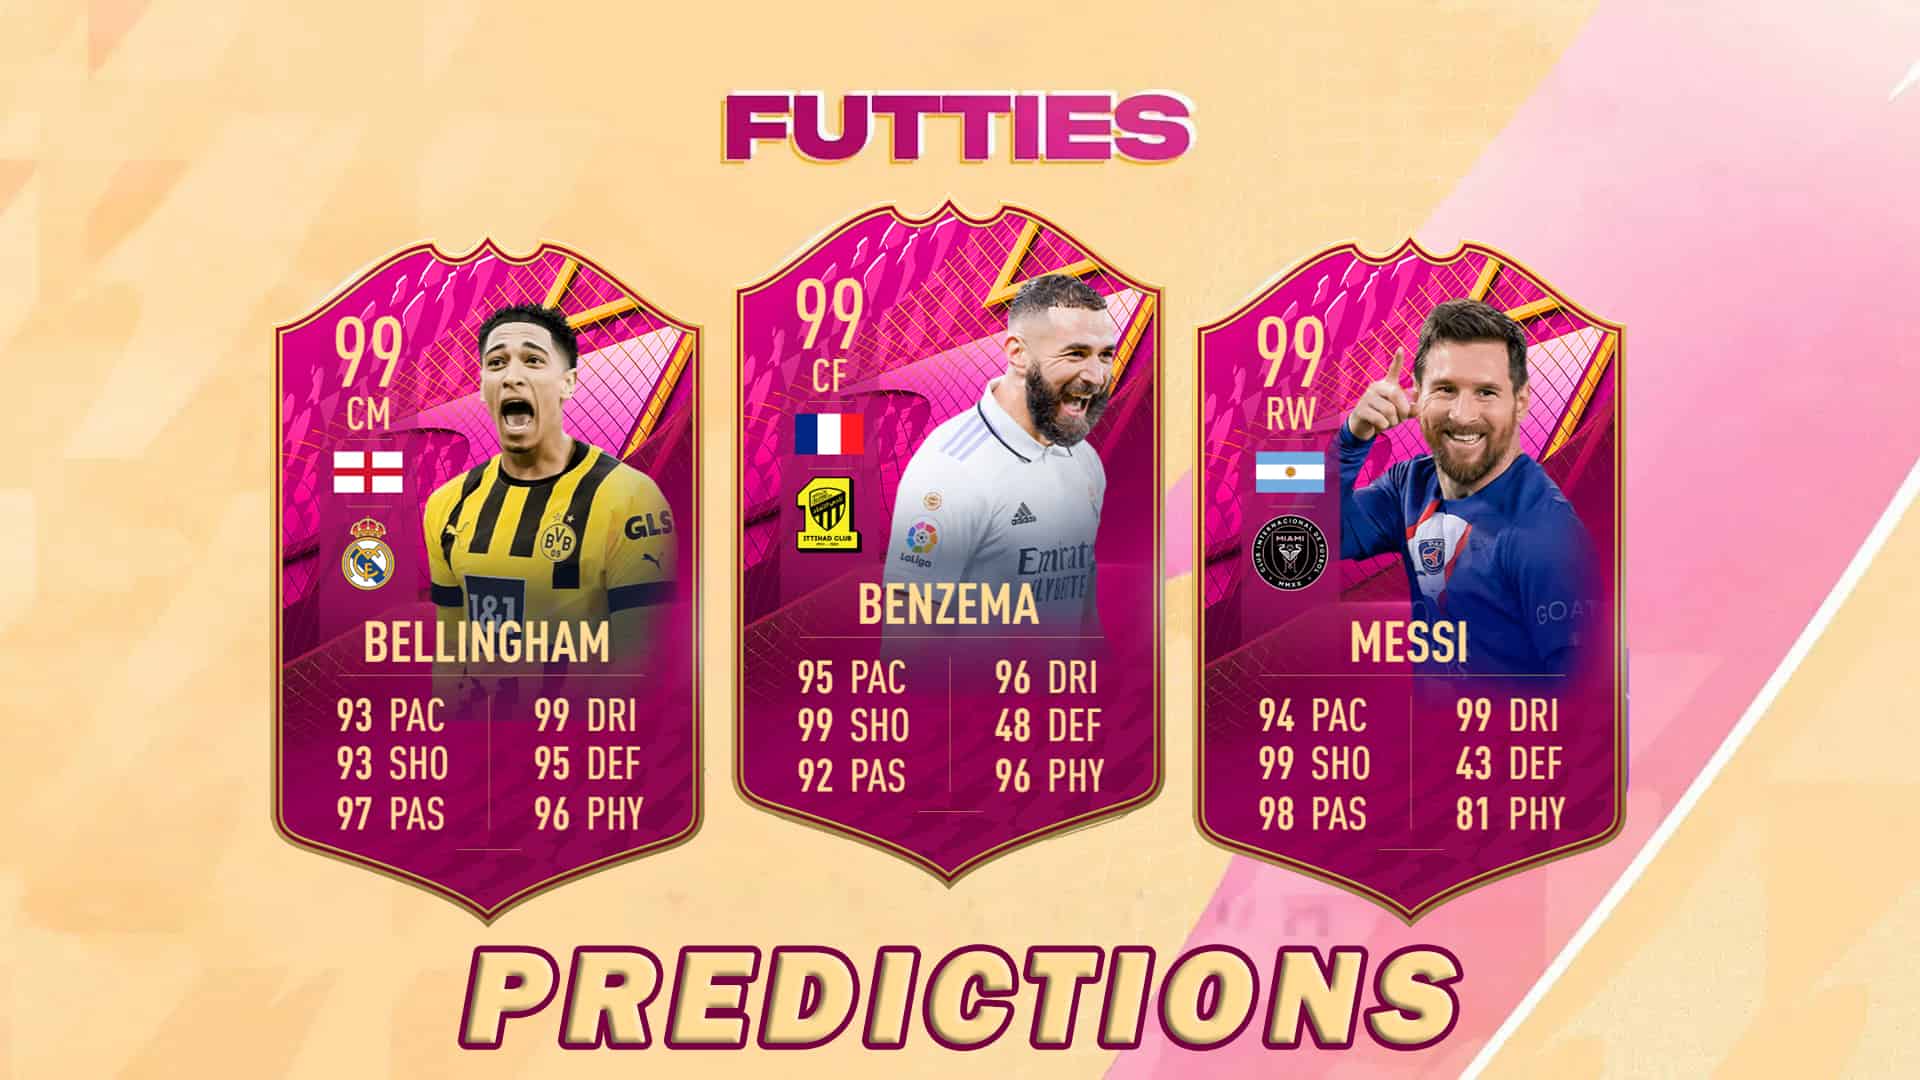 Fifa 23 Futties Predictions With Messi Bellingham And Benzema